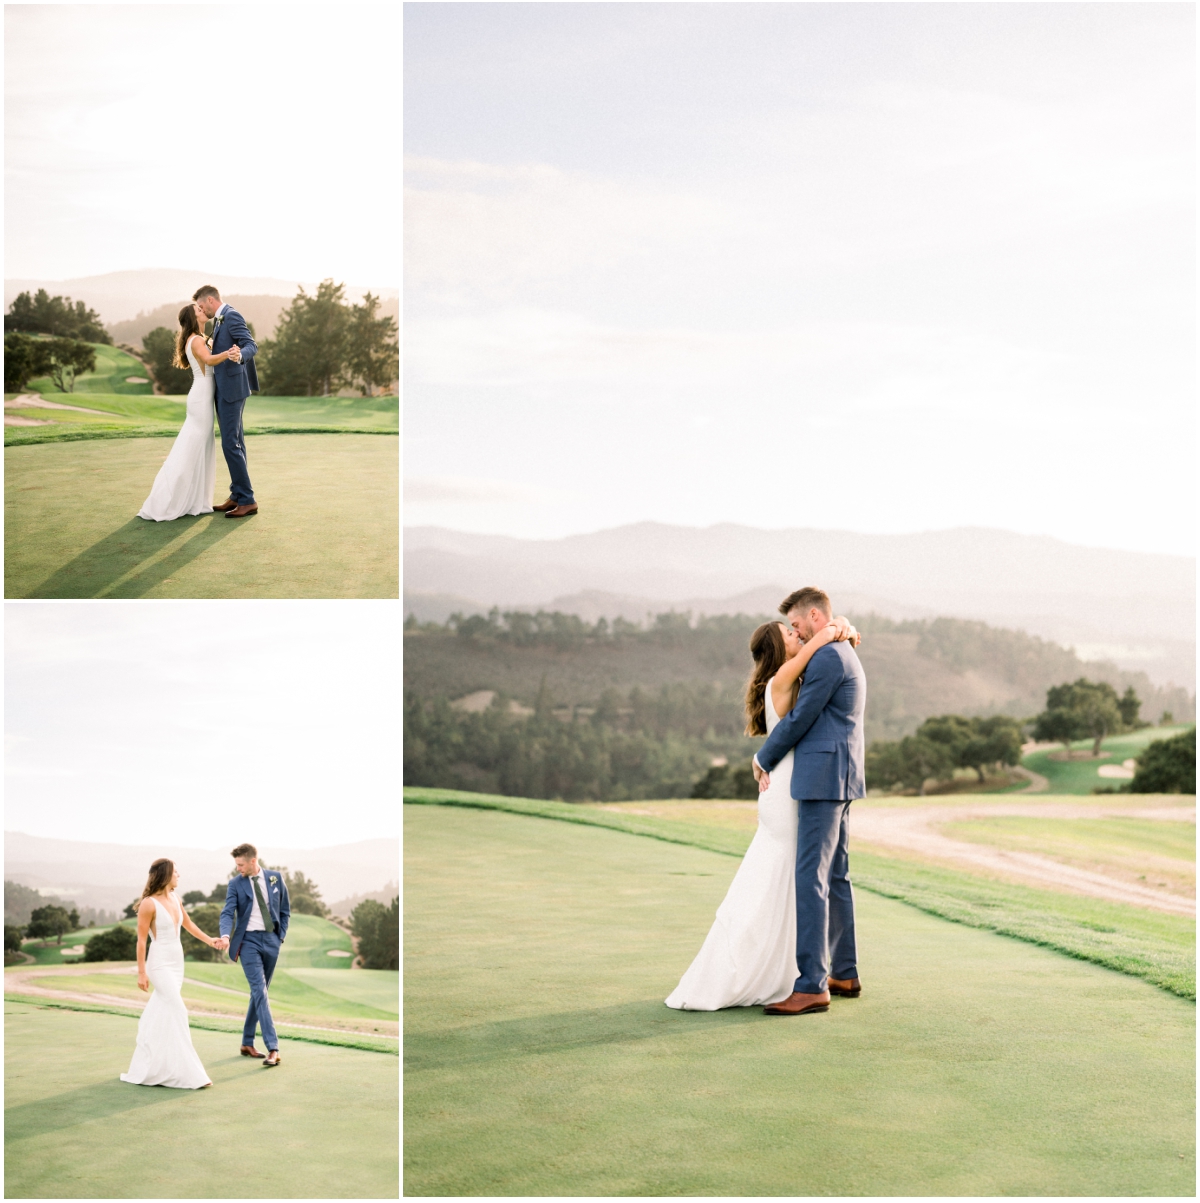 Tehama golf club wedding picture with rolling hills